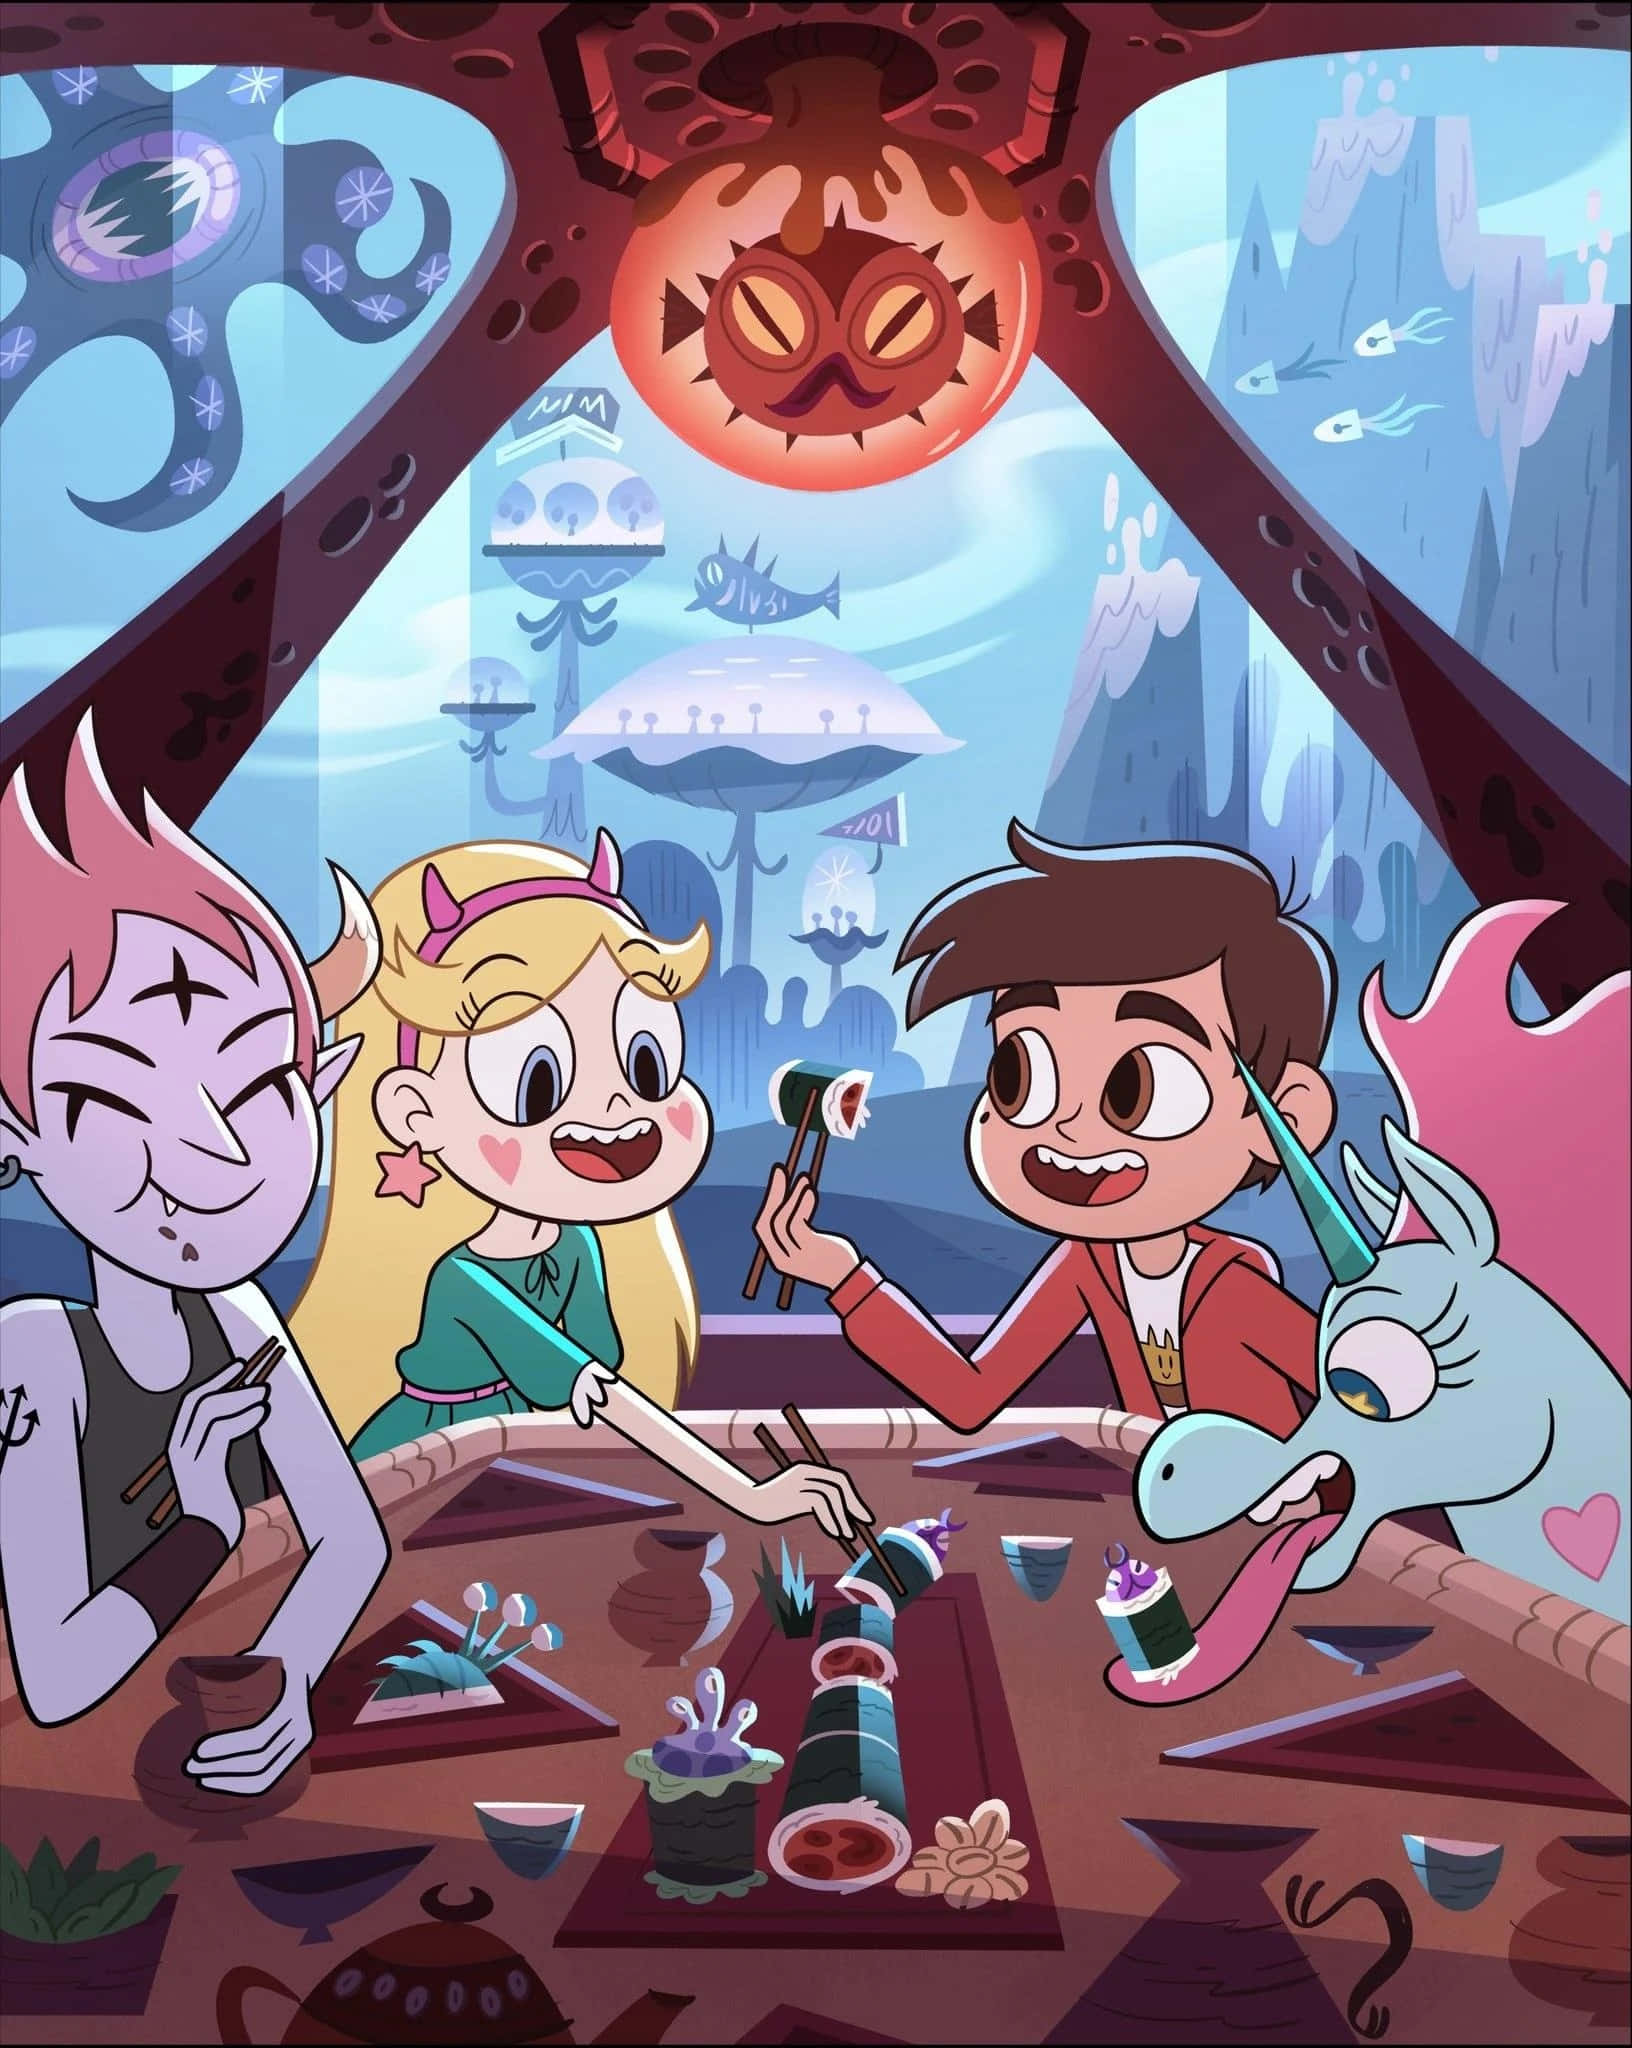 Star Vs The Forces Of Evil colorful background